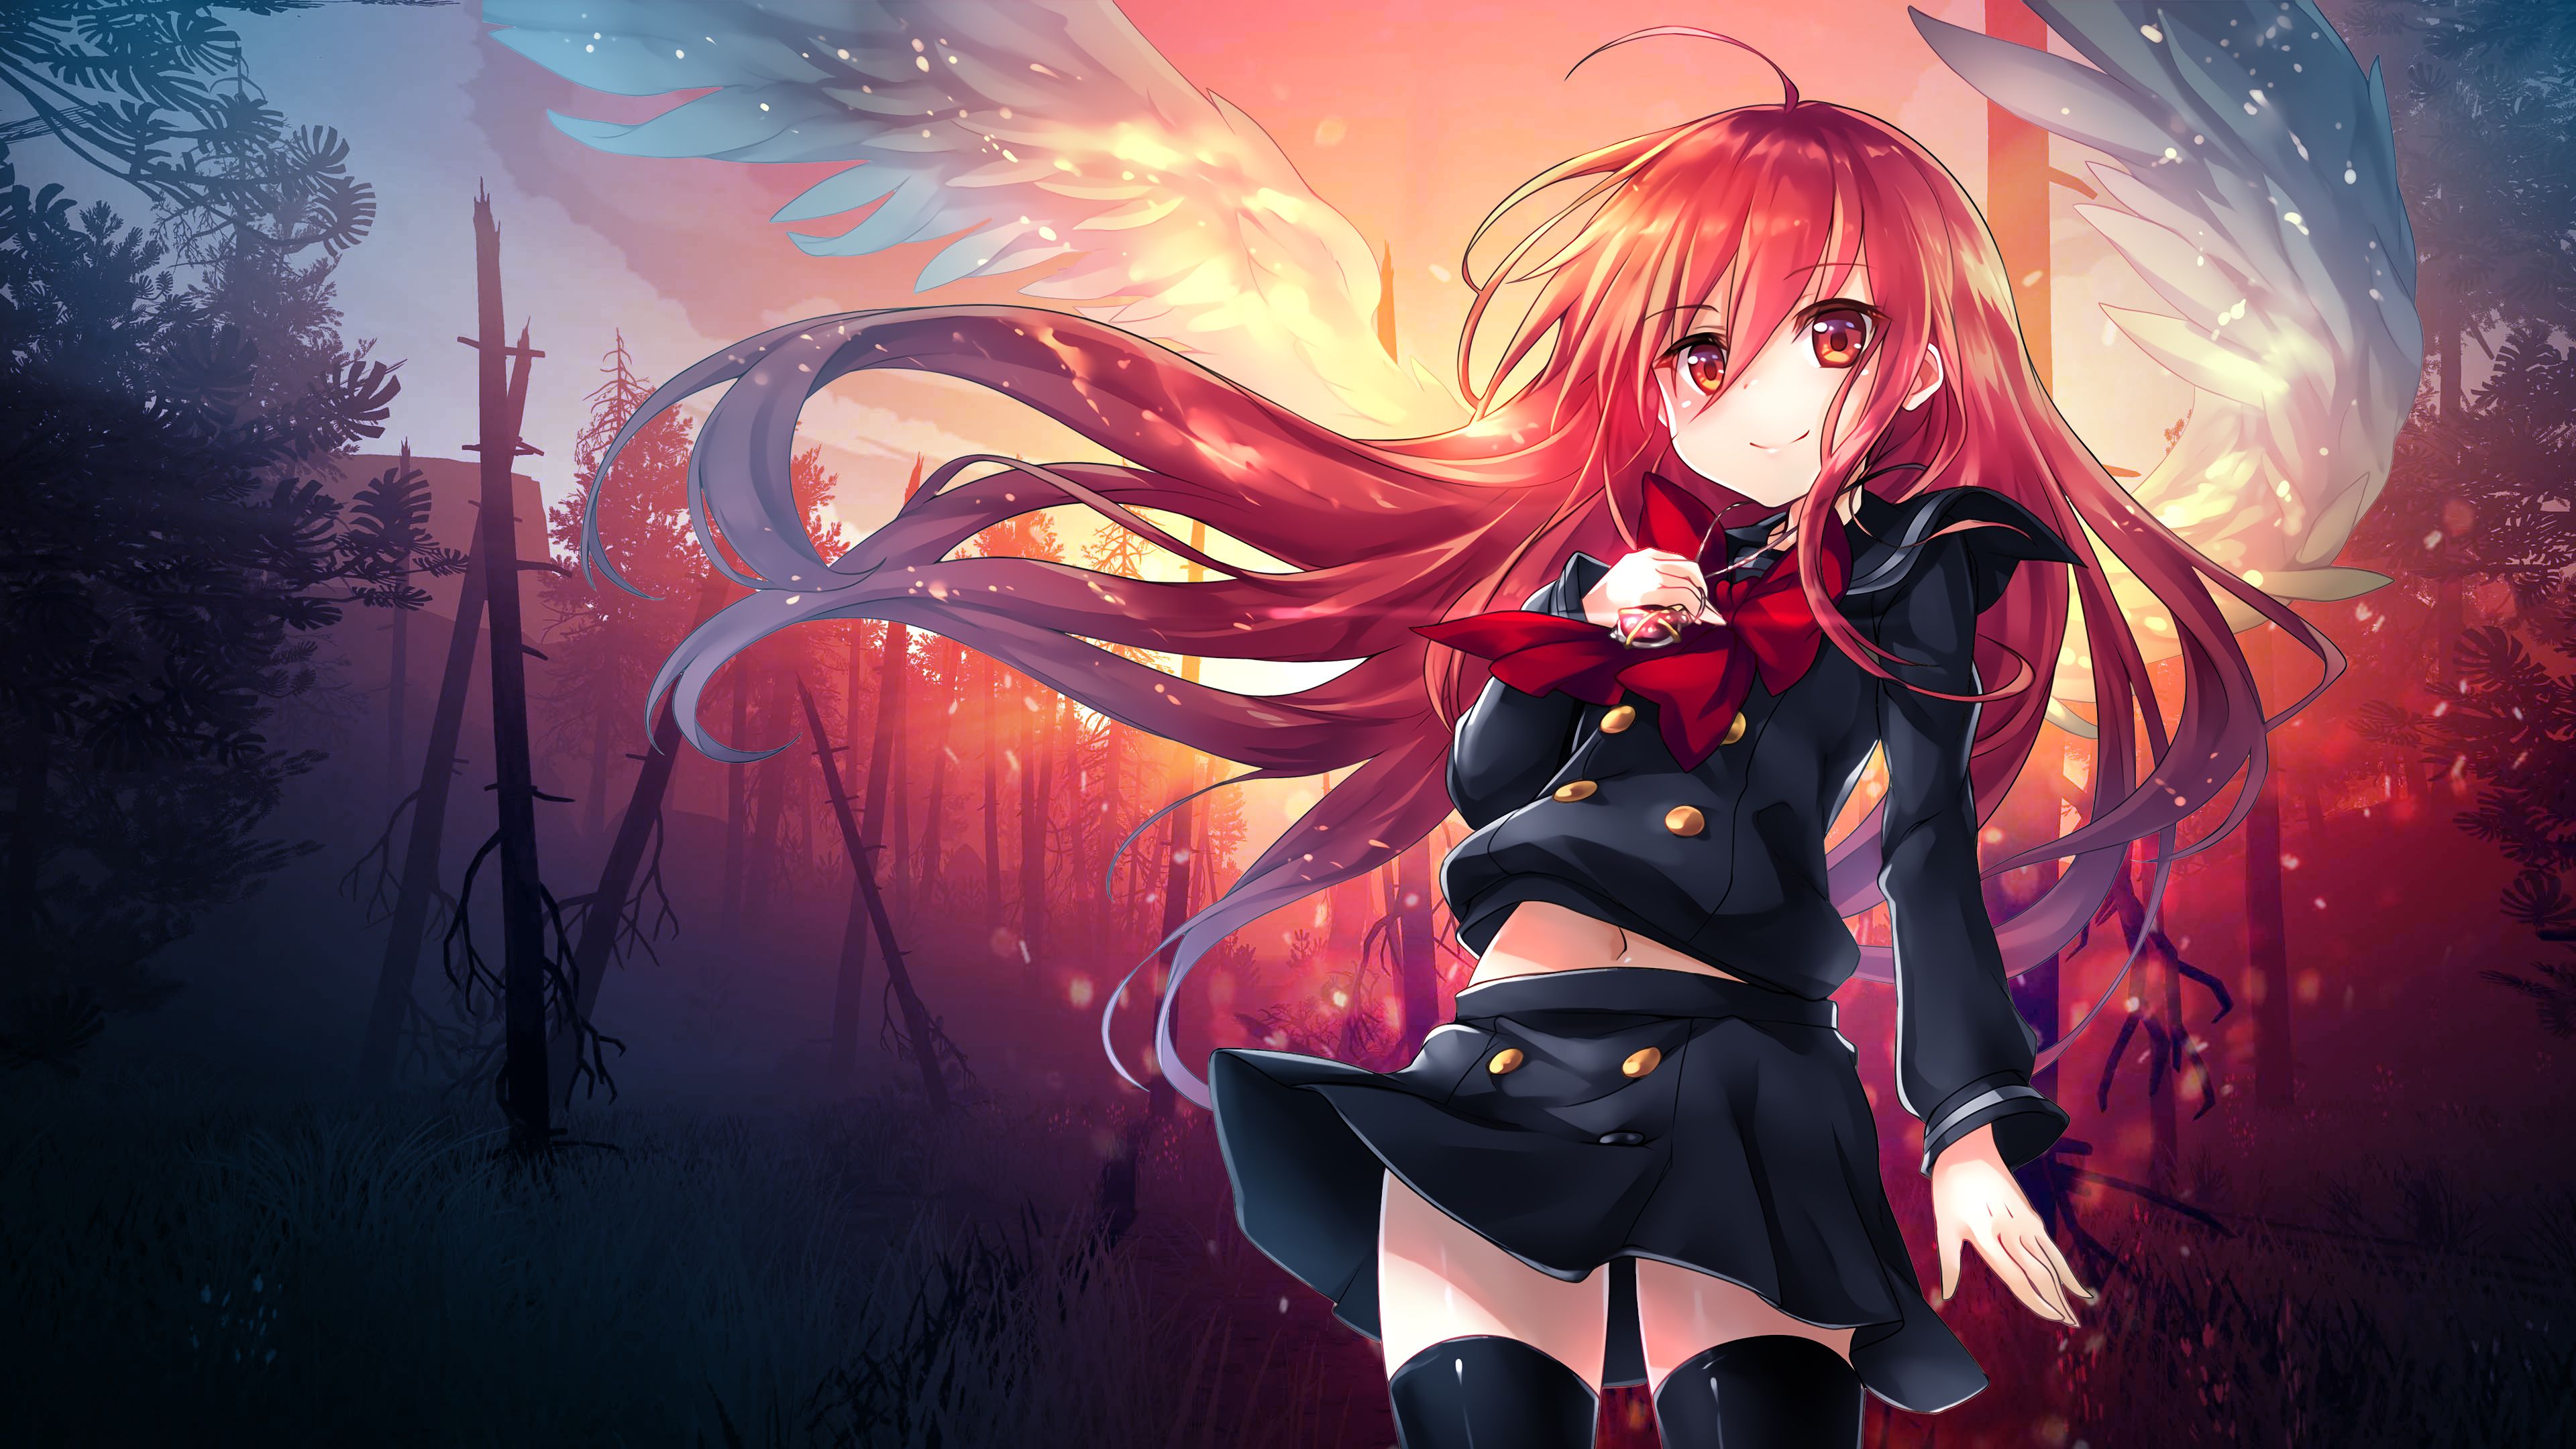 Anime 4K wallpaper for your desktop or mobile screen free and easy to download